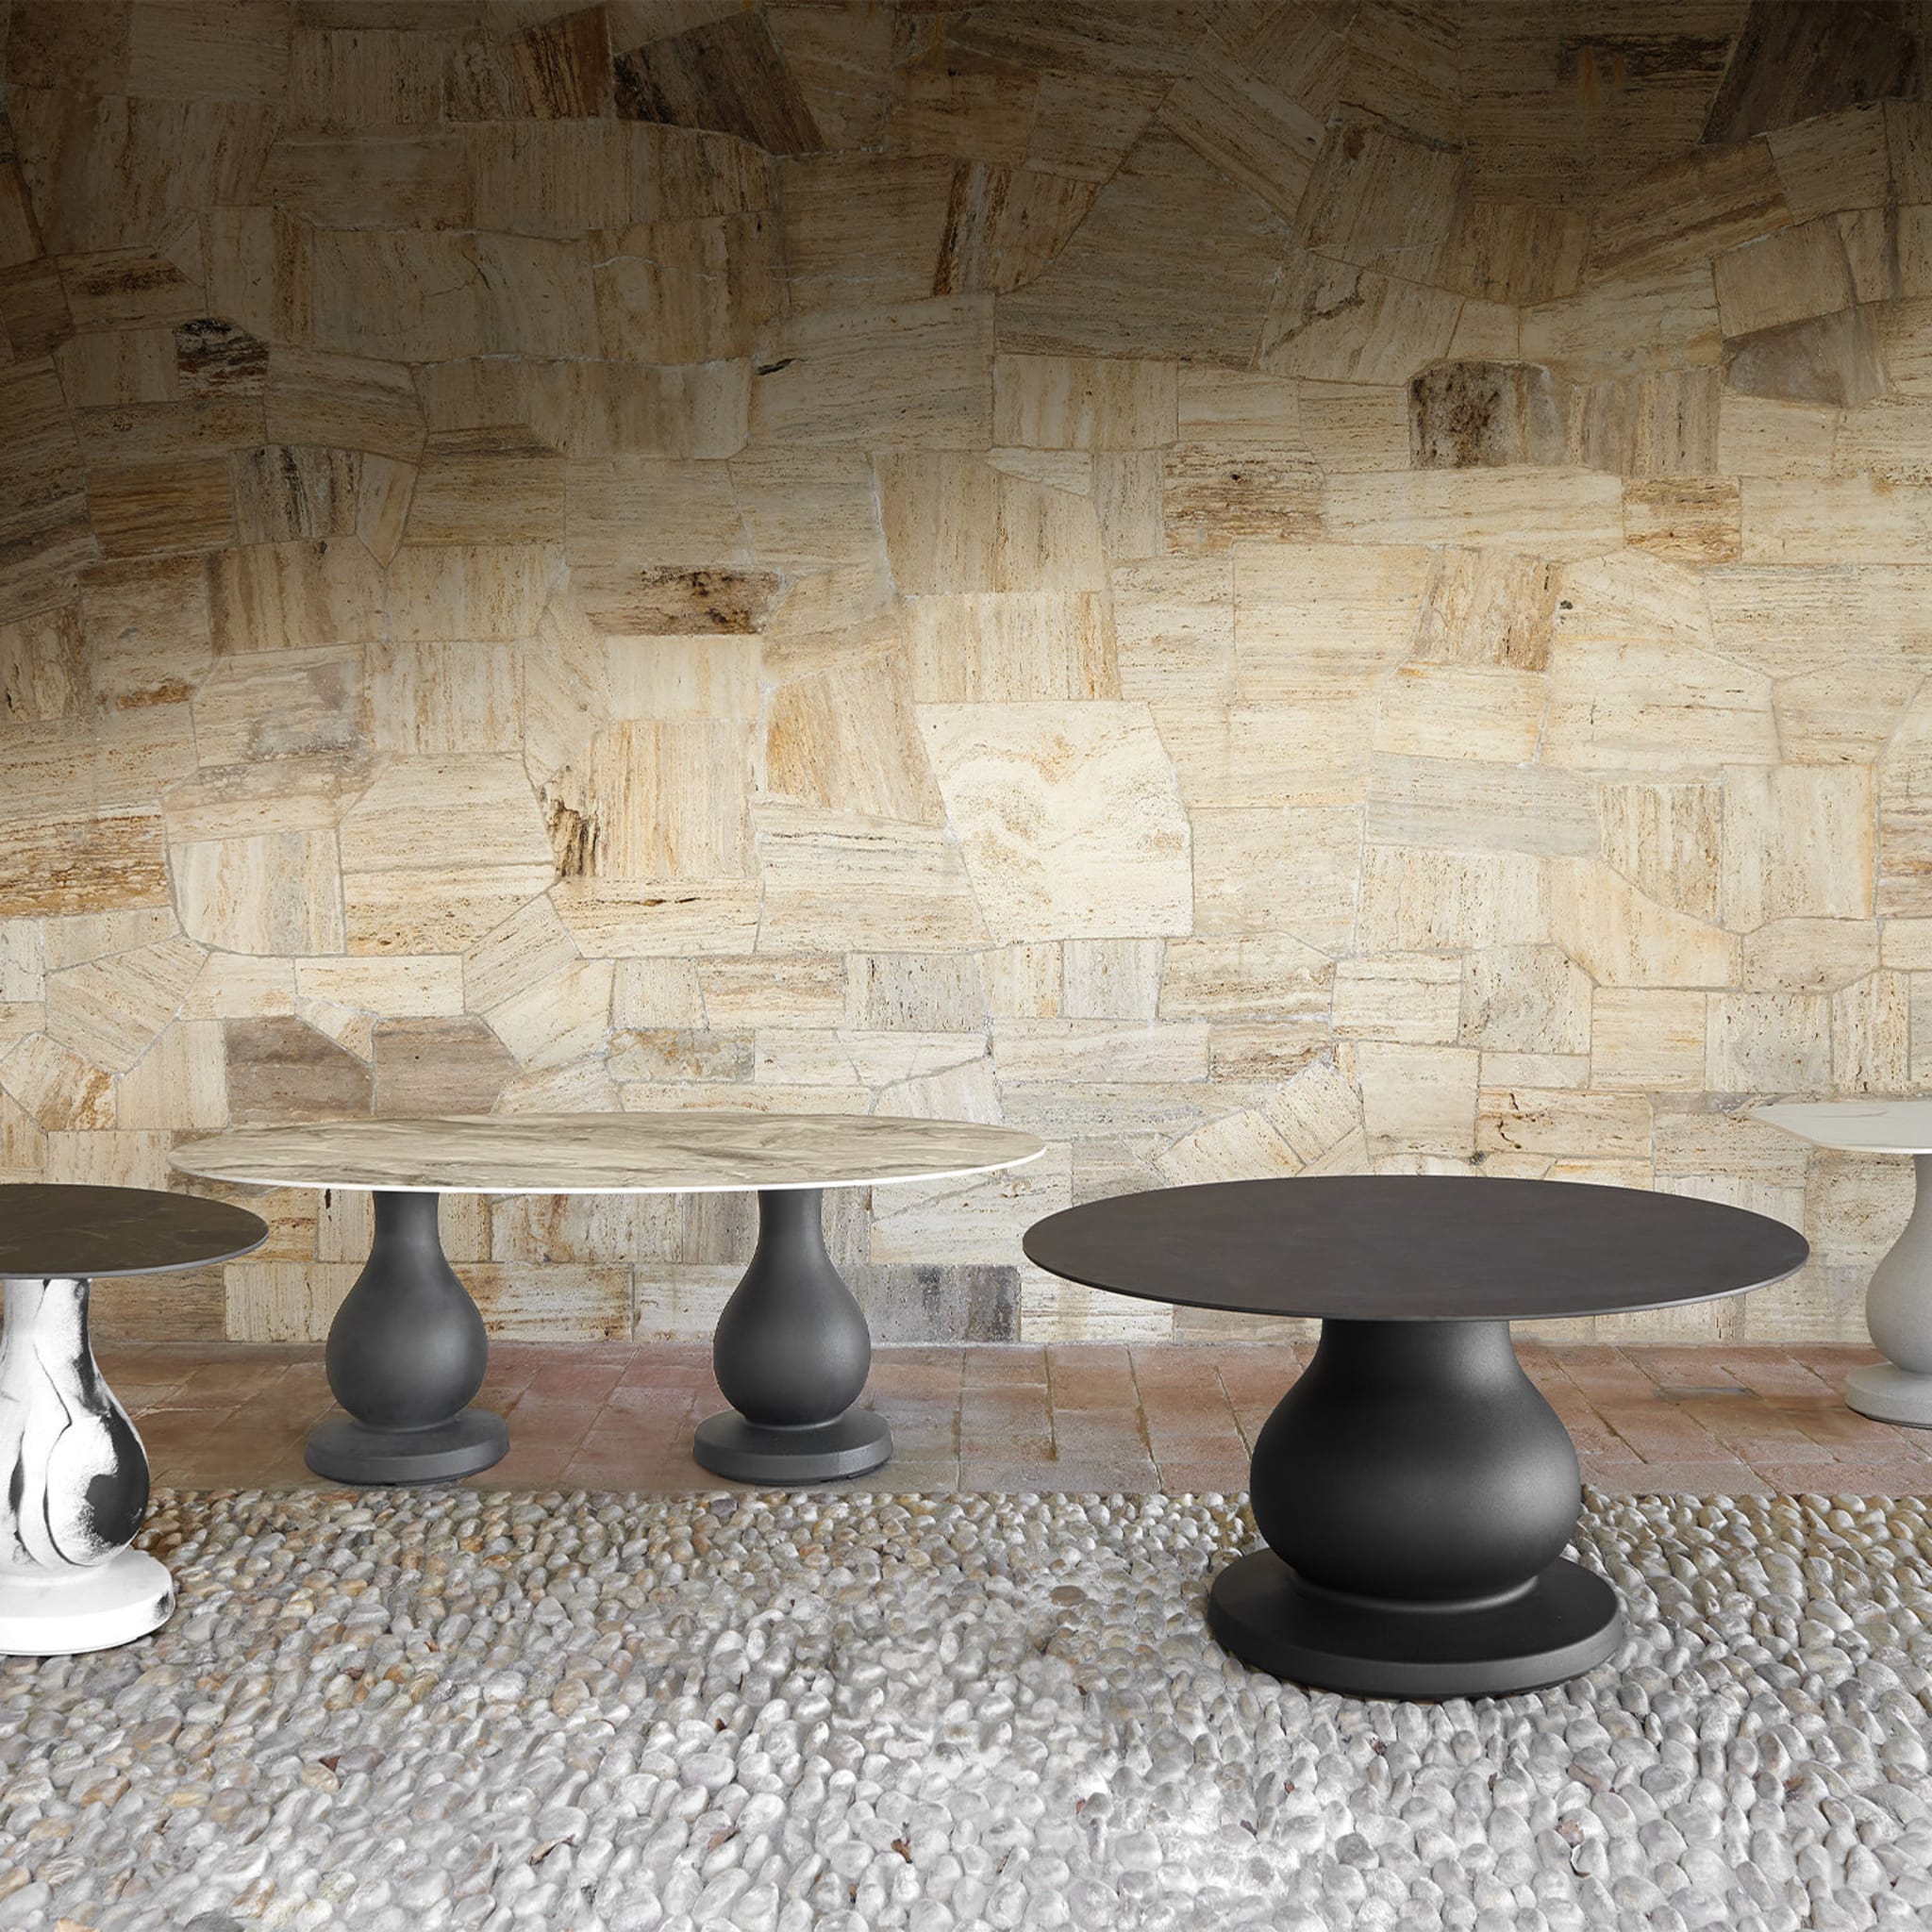 Ottocento Black and Wenge Large Table by Paola Navone - Alternative view 2